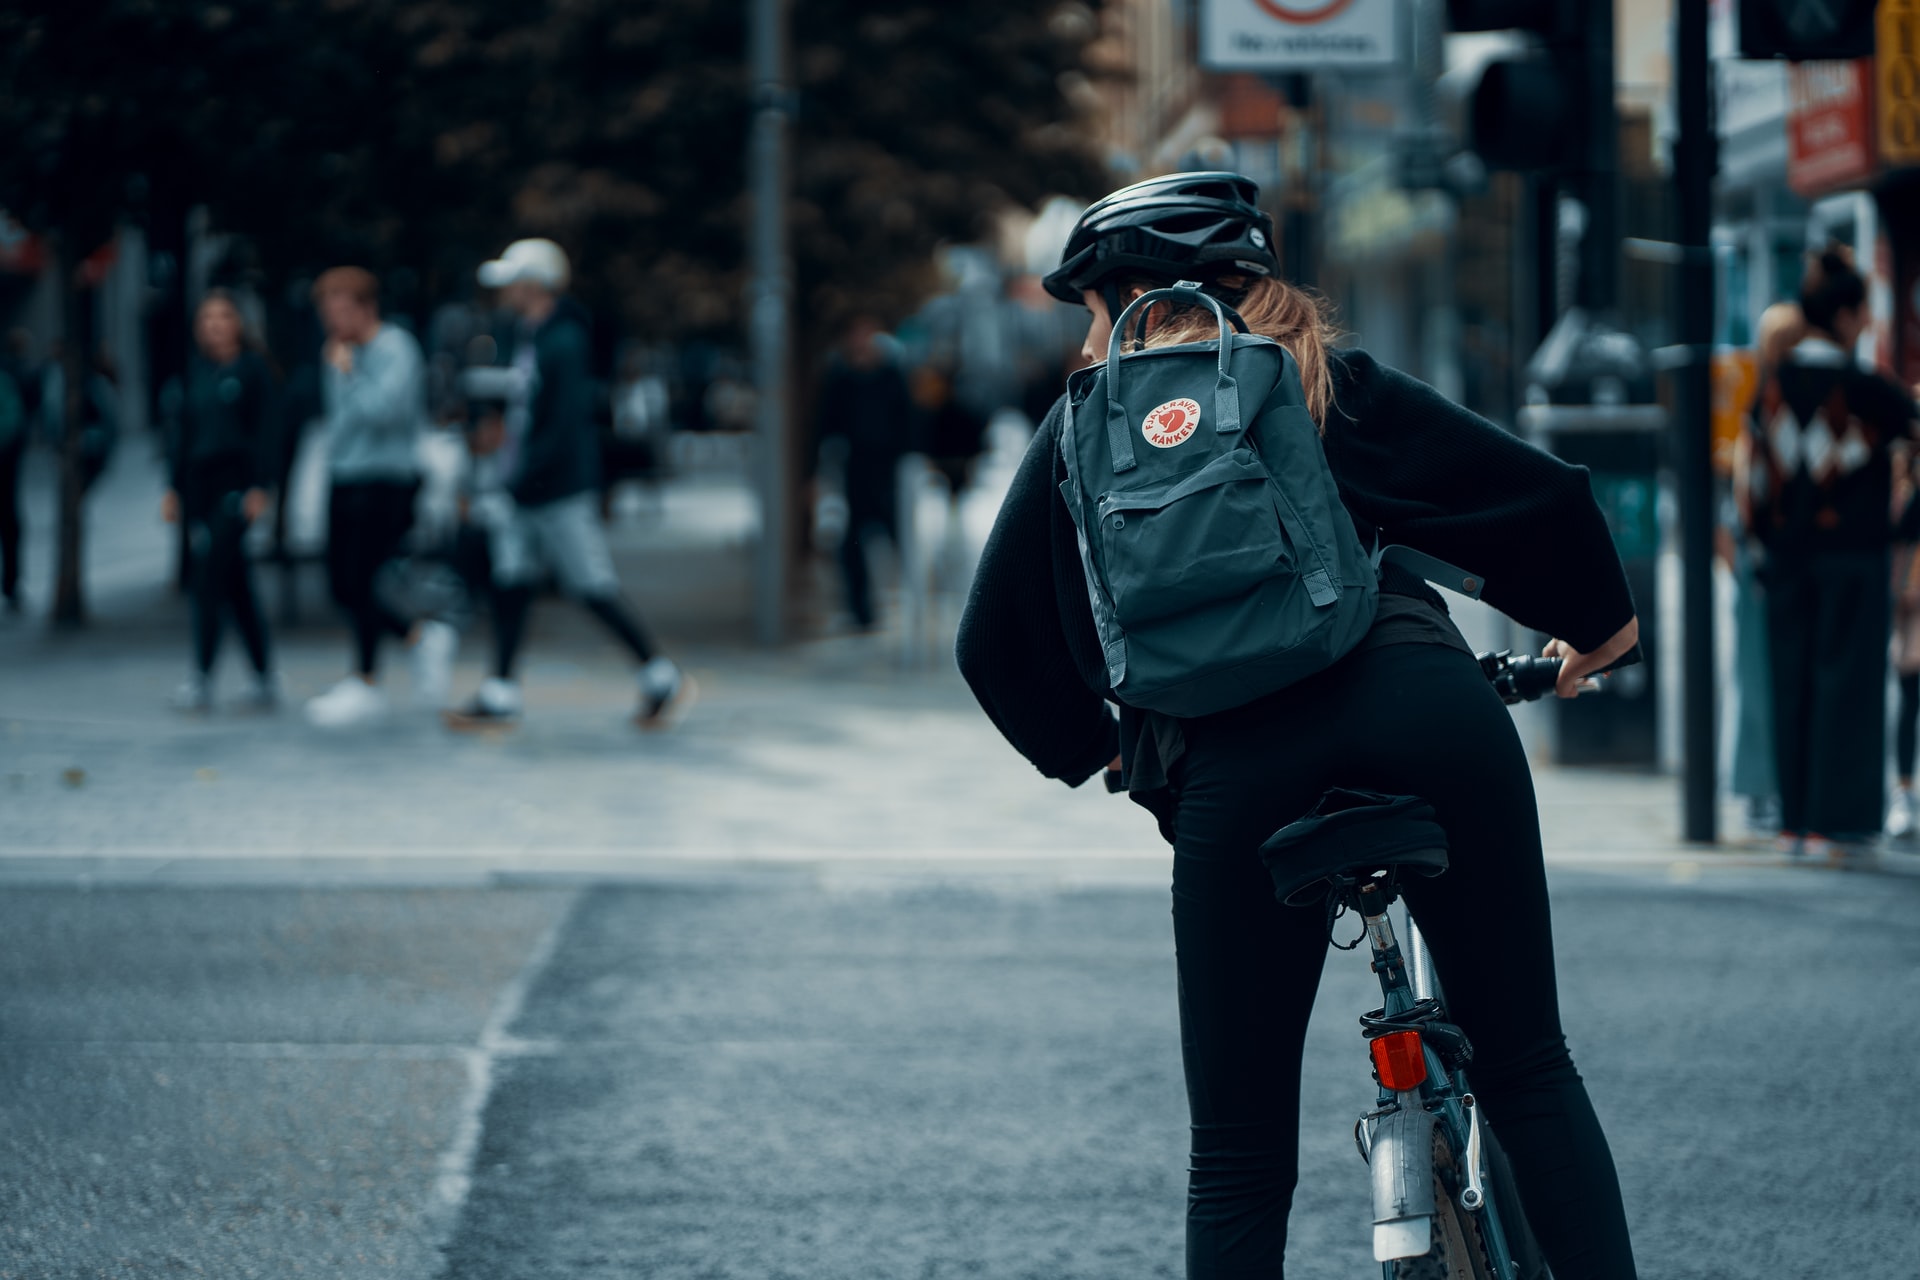 A woman on a bike on Sauchiehall Street in Glasgow. She is wearing a helmet and a backpack.